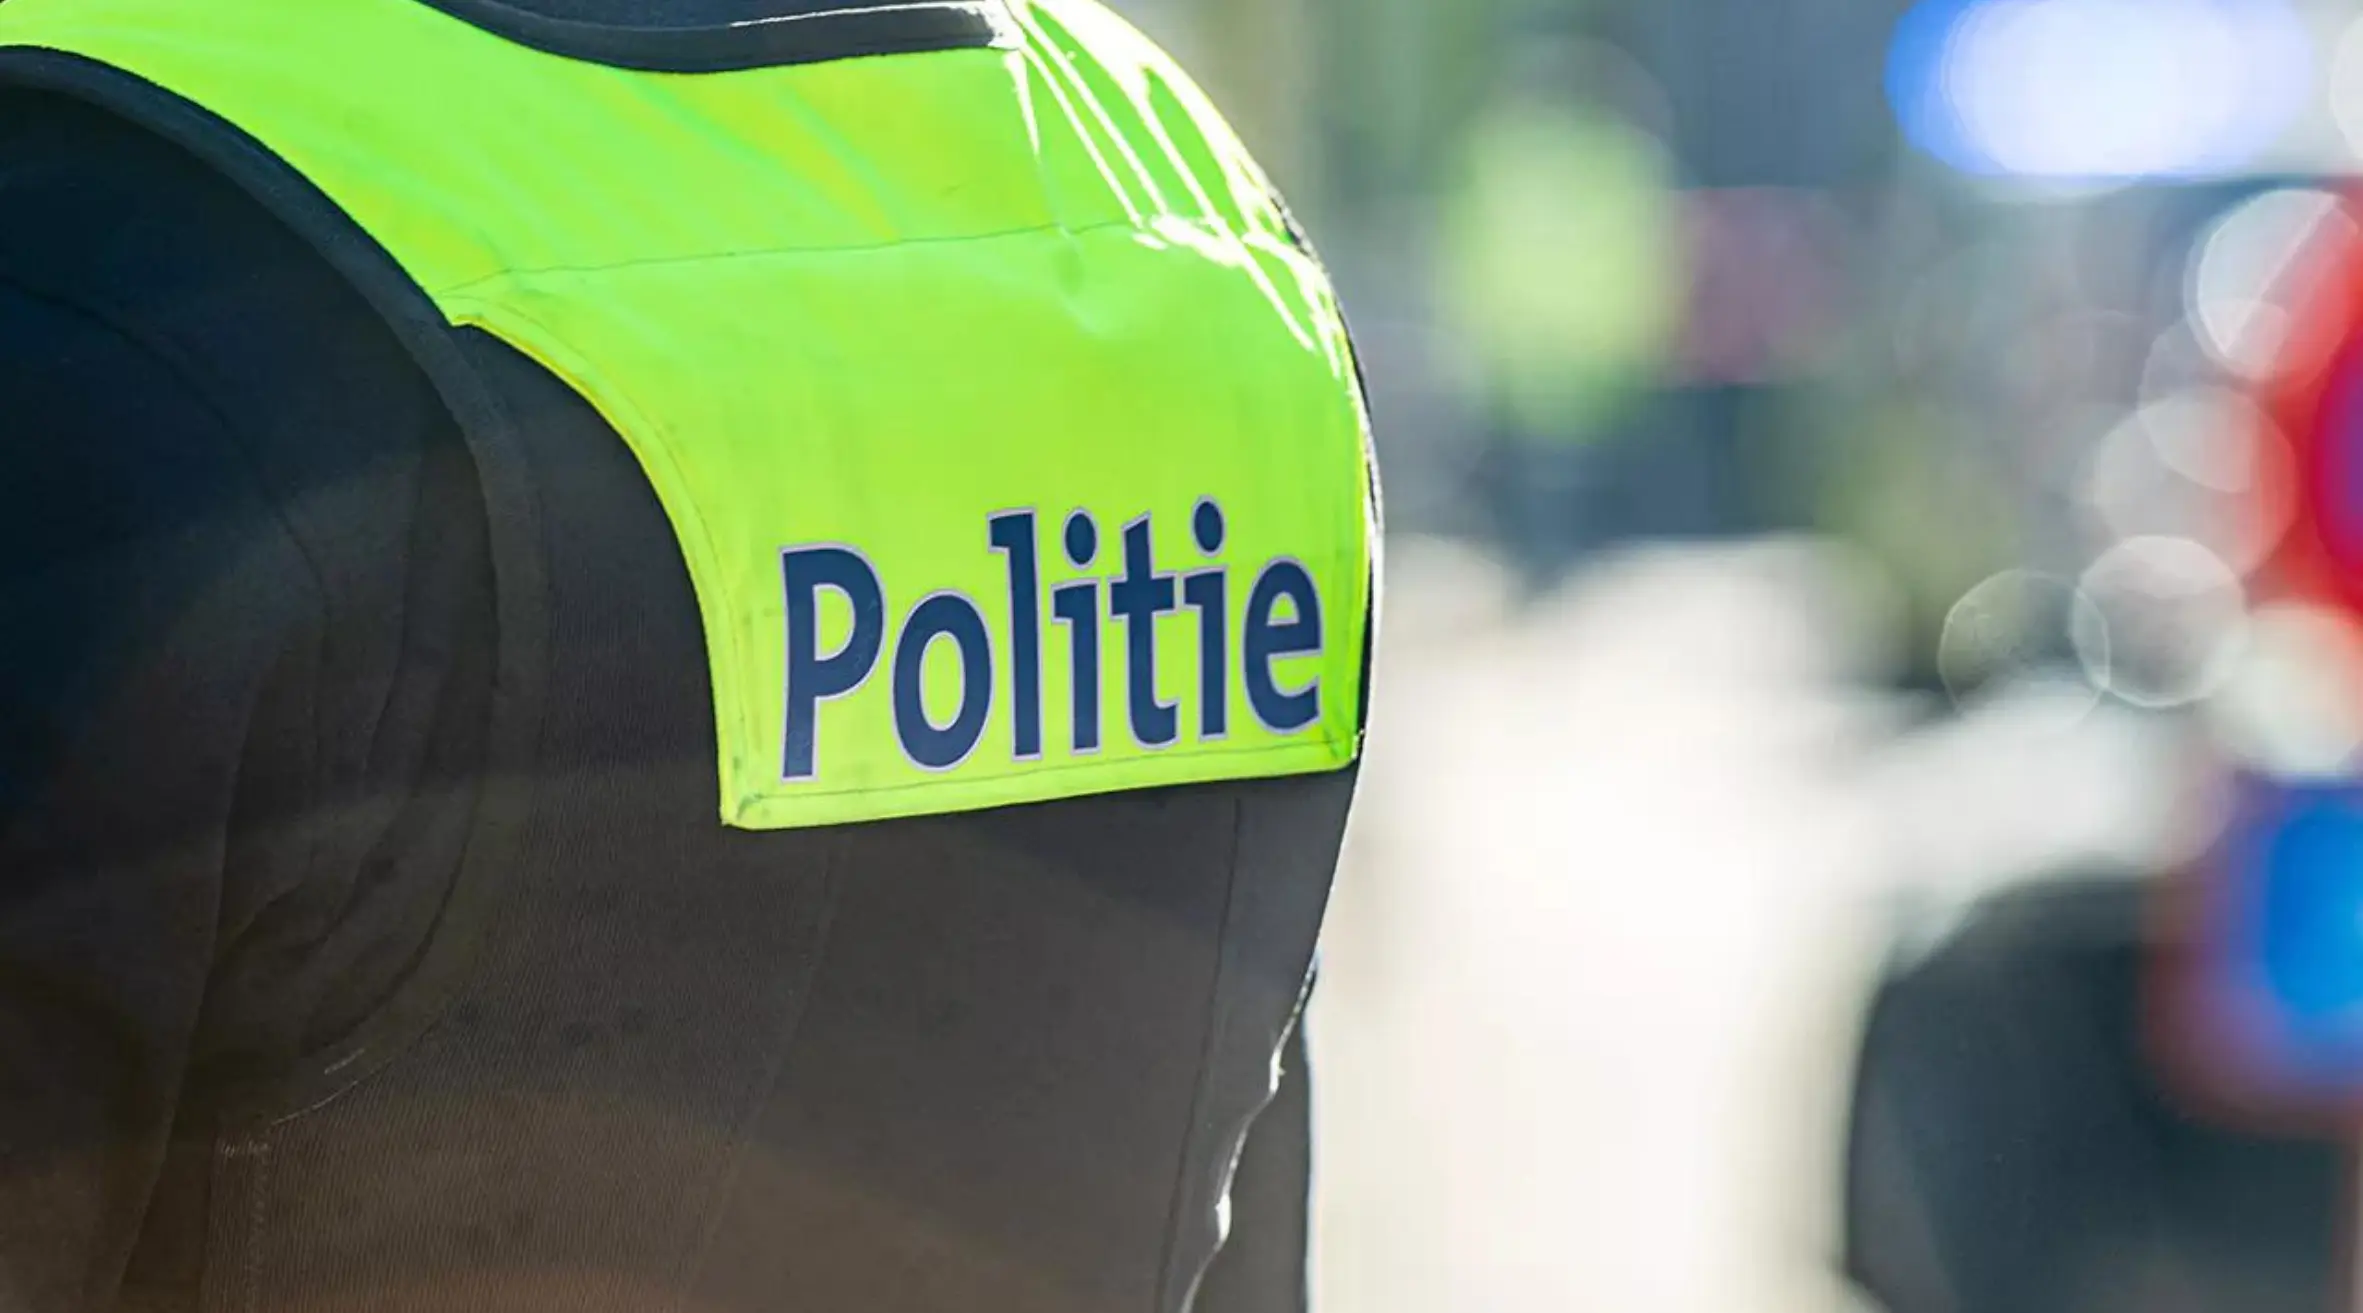 The Youth and Police project in Antwerp aims to improve relationships through communication and understanding